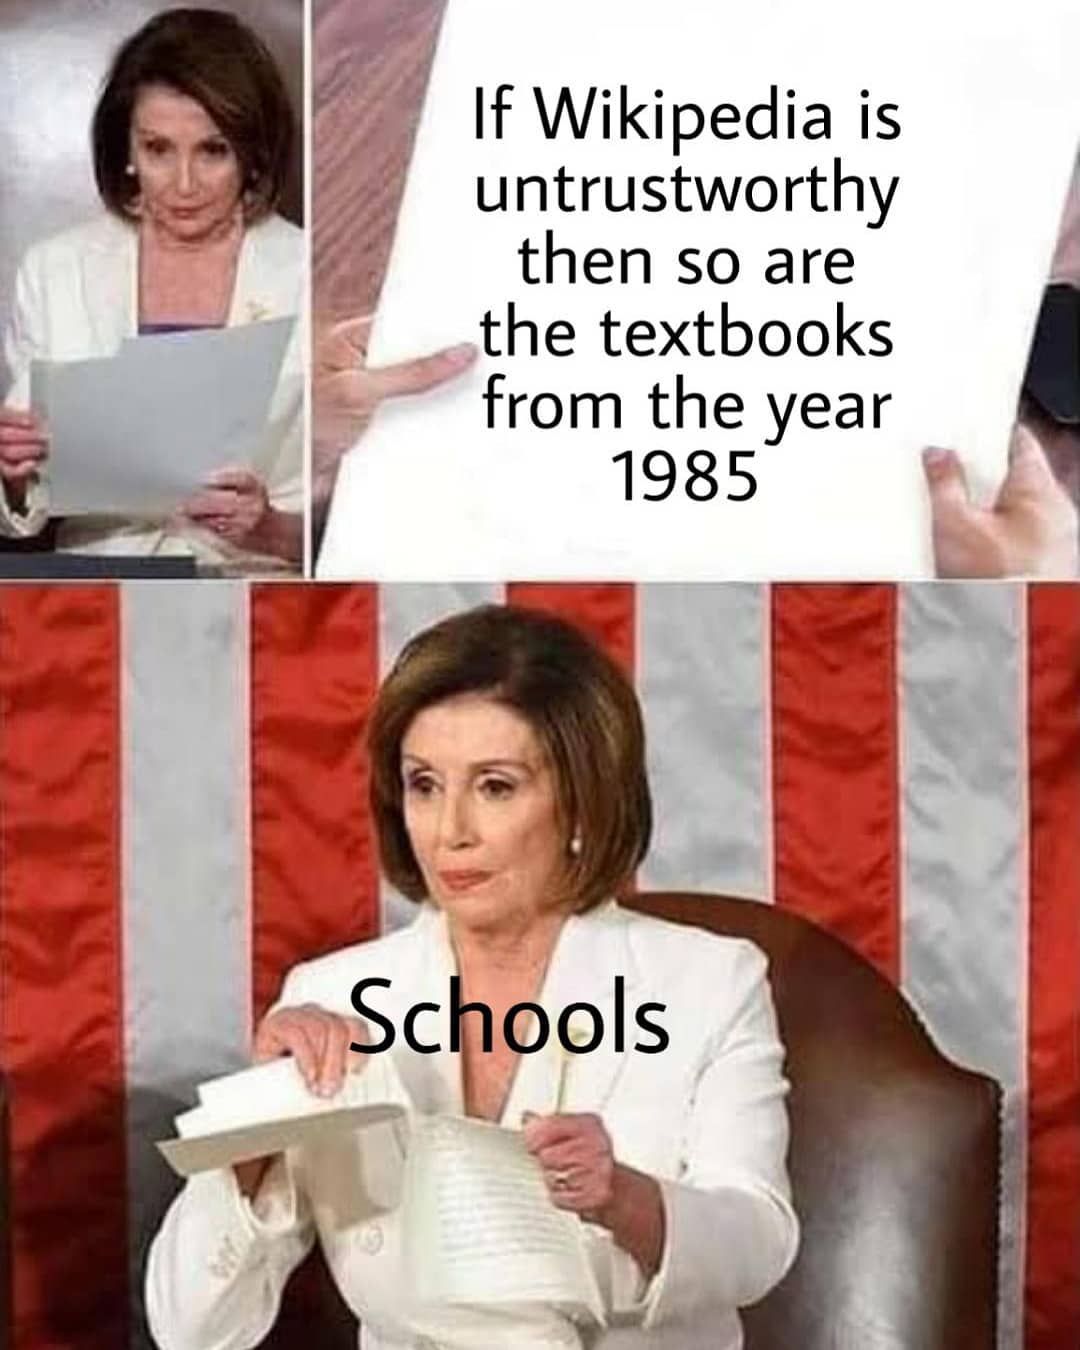 nancy pelosi meme template - If Wikipedia is untrustworthy then so are the textbooks from the year 1985 Schools